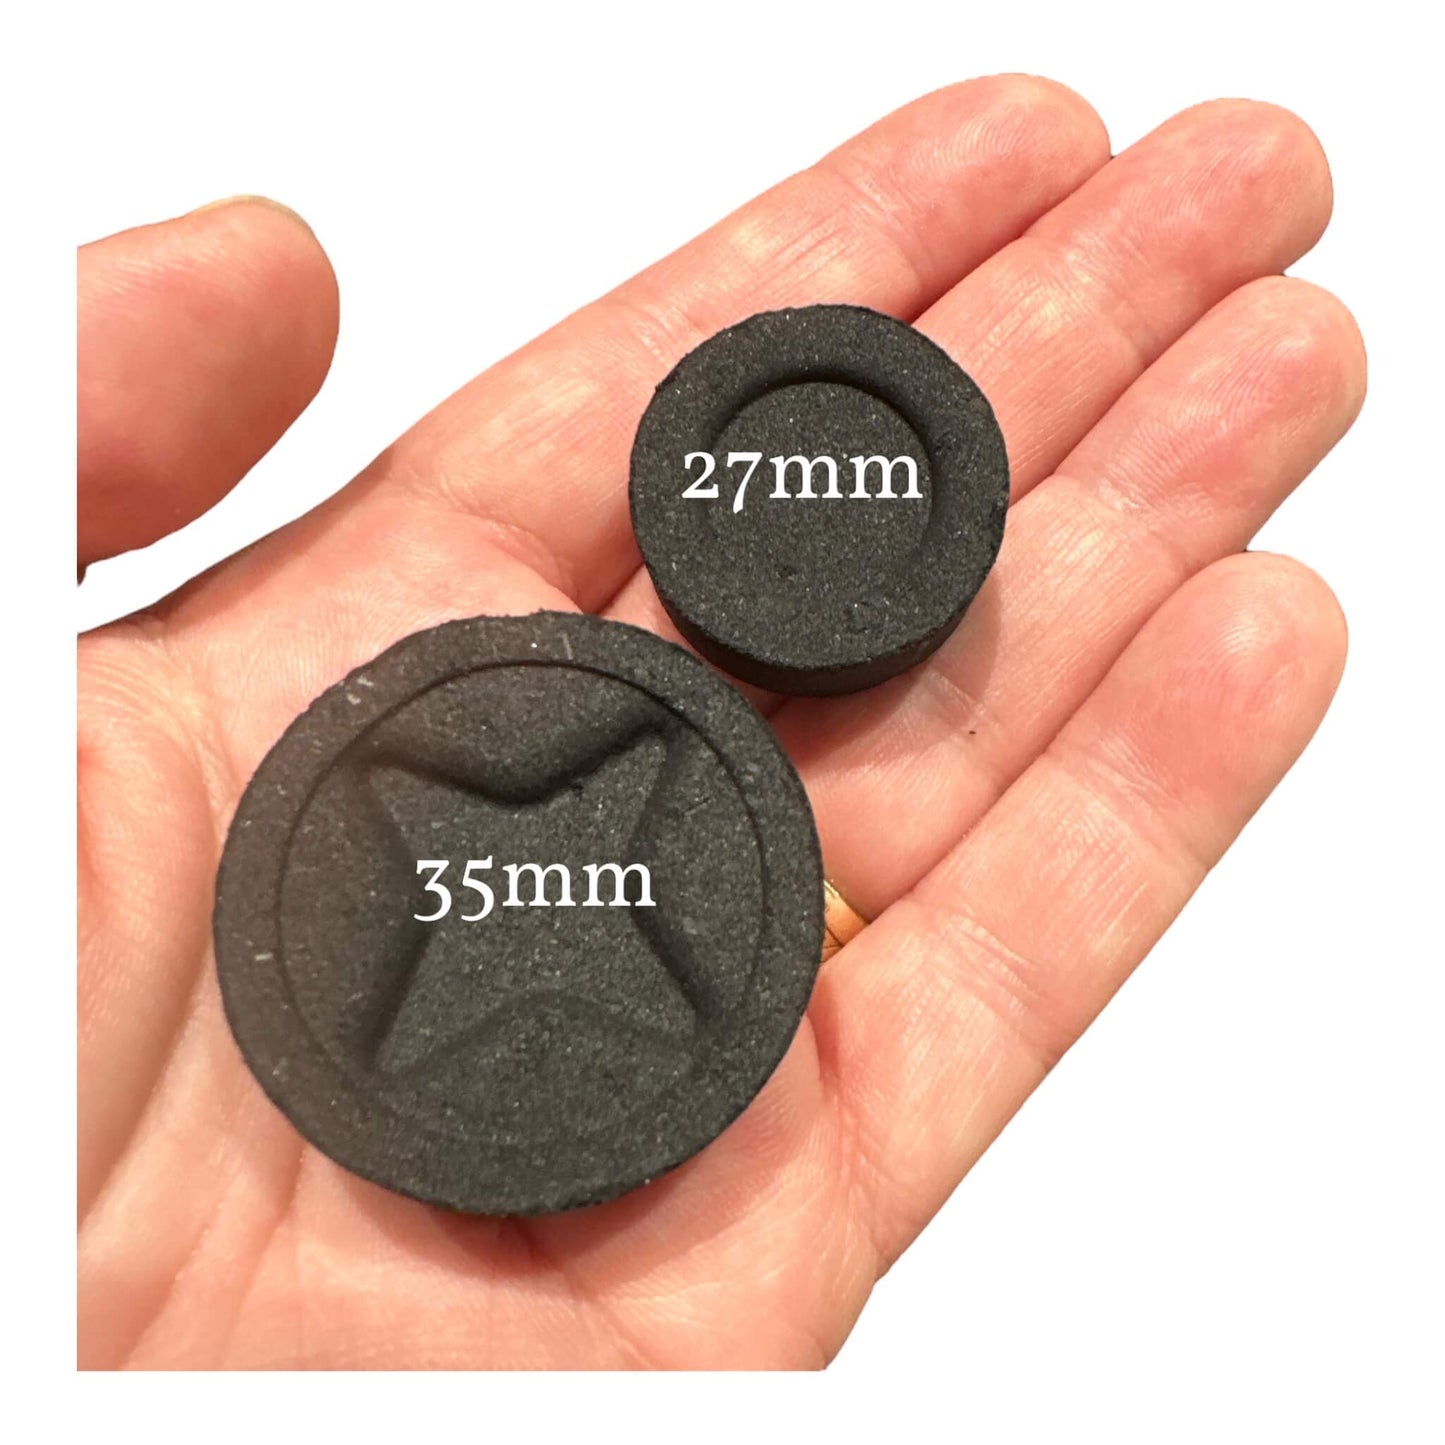 Hand holding individual Easy-Light Charcoal Discs in two sizes (27mm and 35mm). These charcoals are perfect for burning incense resins, providing a quick and efficient way to enhance your space with delightful fragrances.